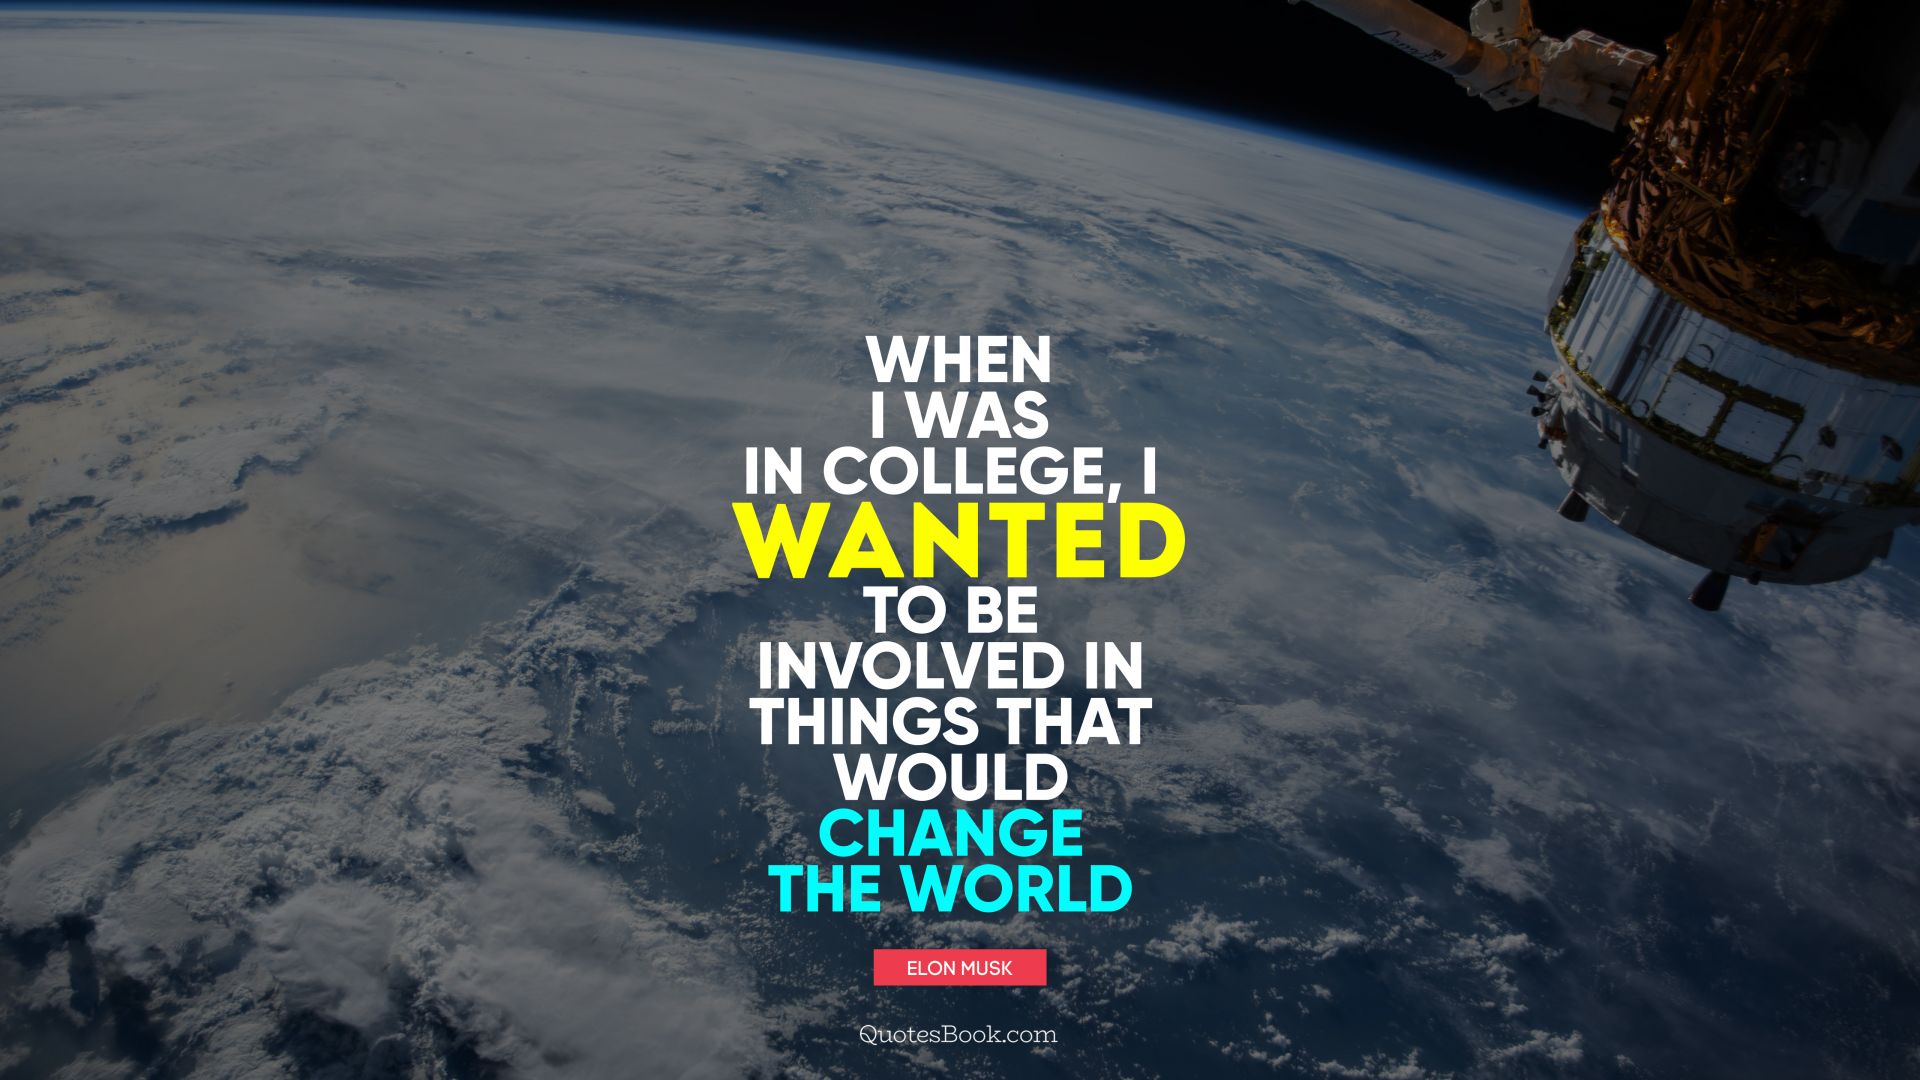 When I was in college, I wanted to be involved in things that would change the world. - Quote by Elon Musk